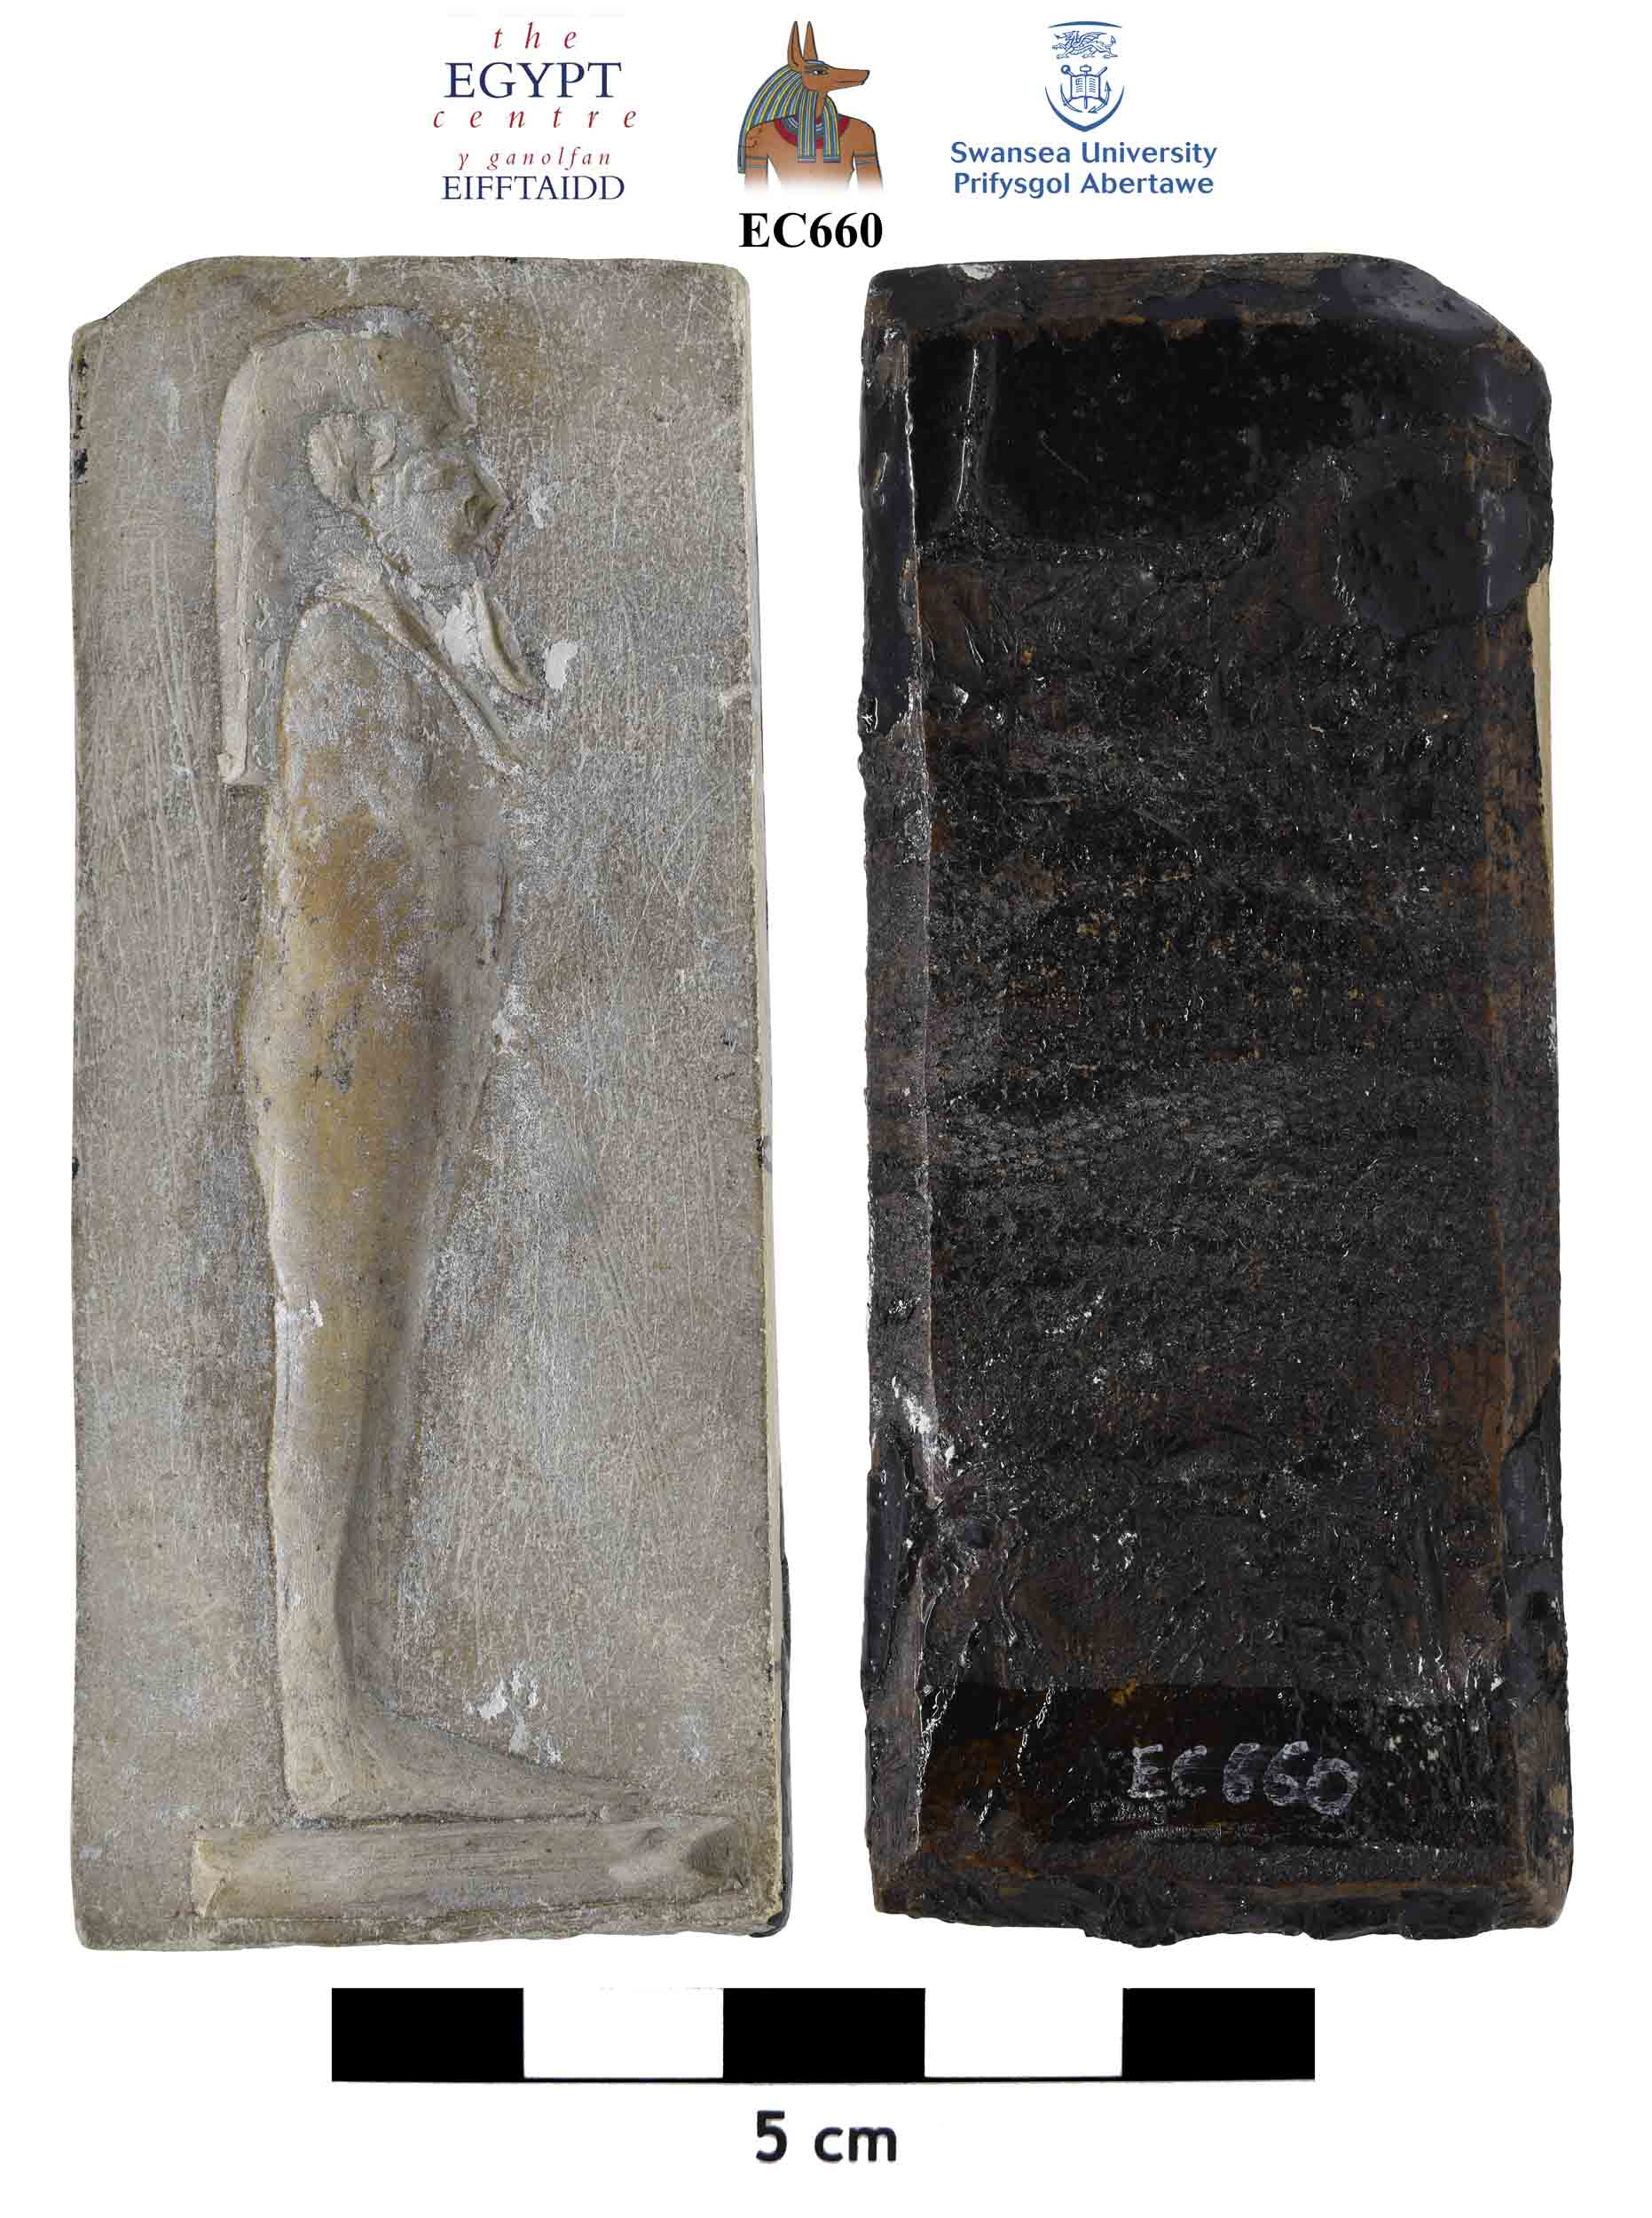 Image for: Pottery amulet mould for an Osiris figure